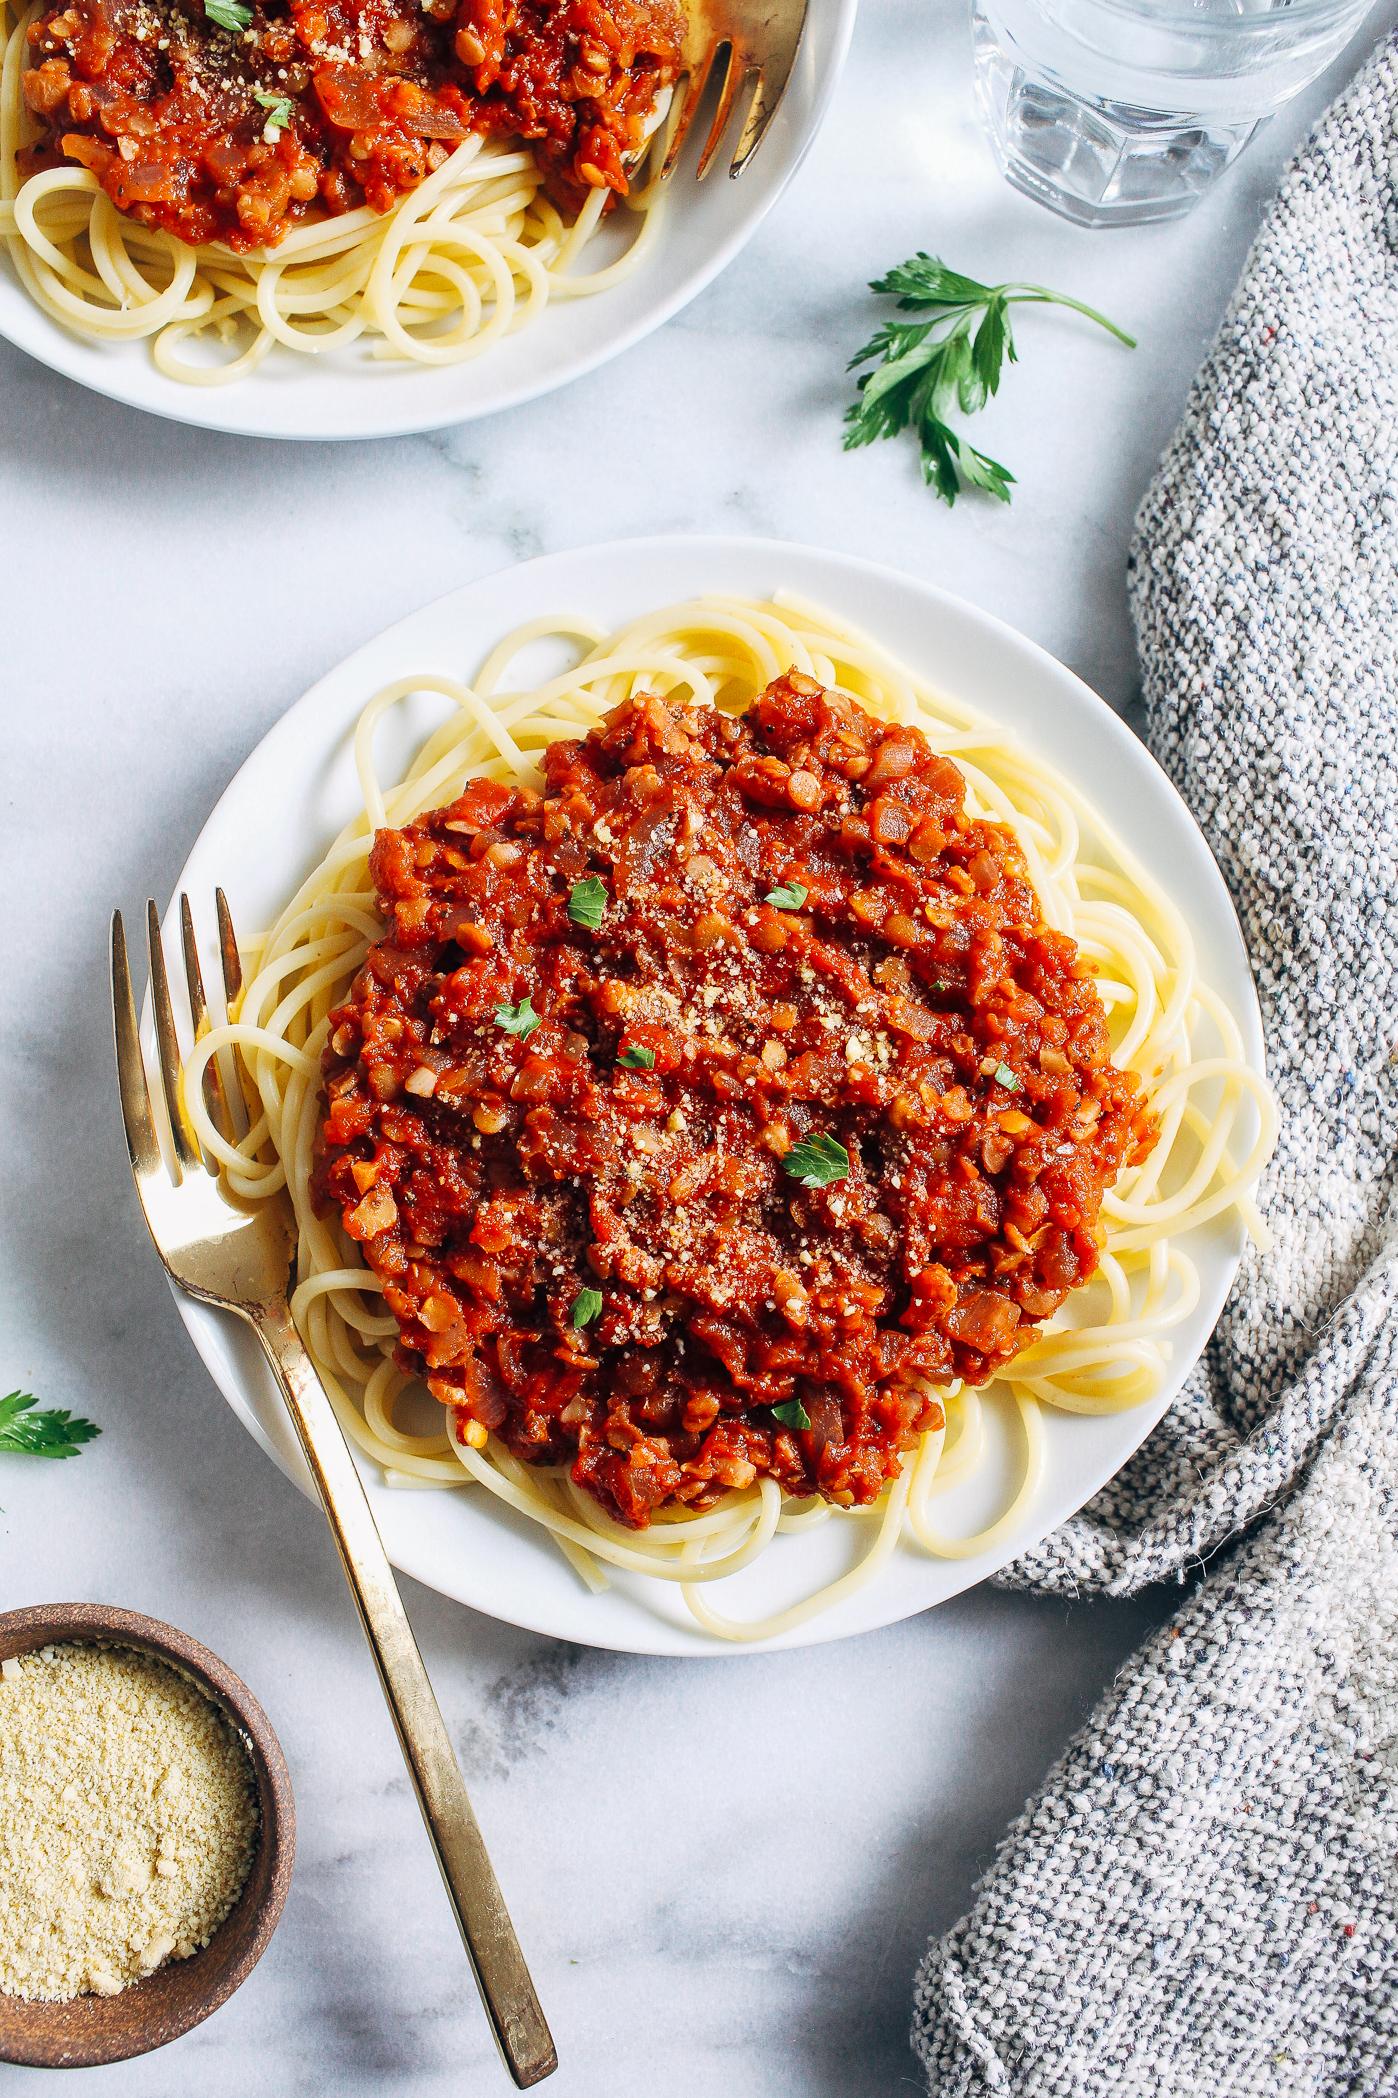  Say goodbye to boring pasta dishes and try out this tasty red lentil spaghetti sauce.